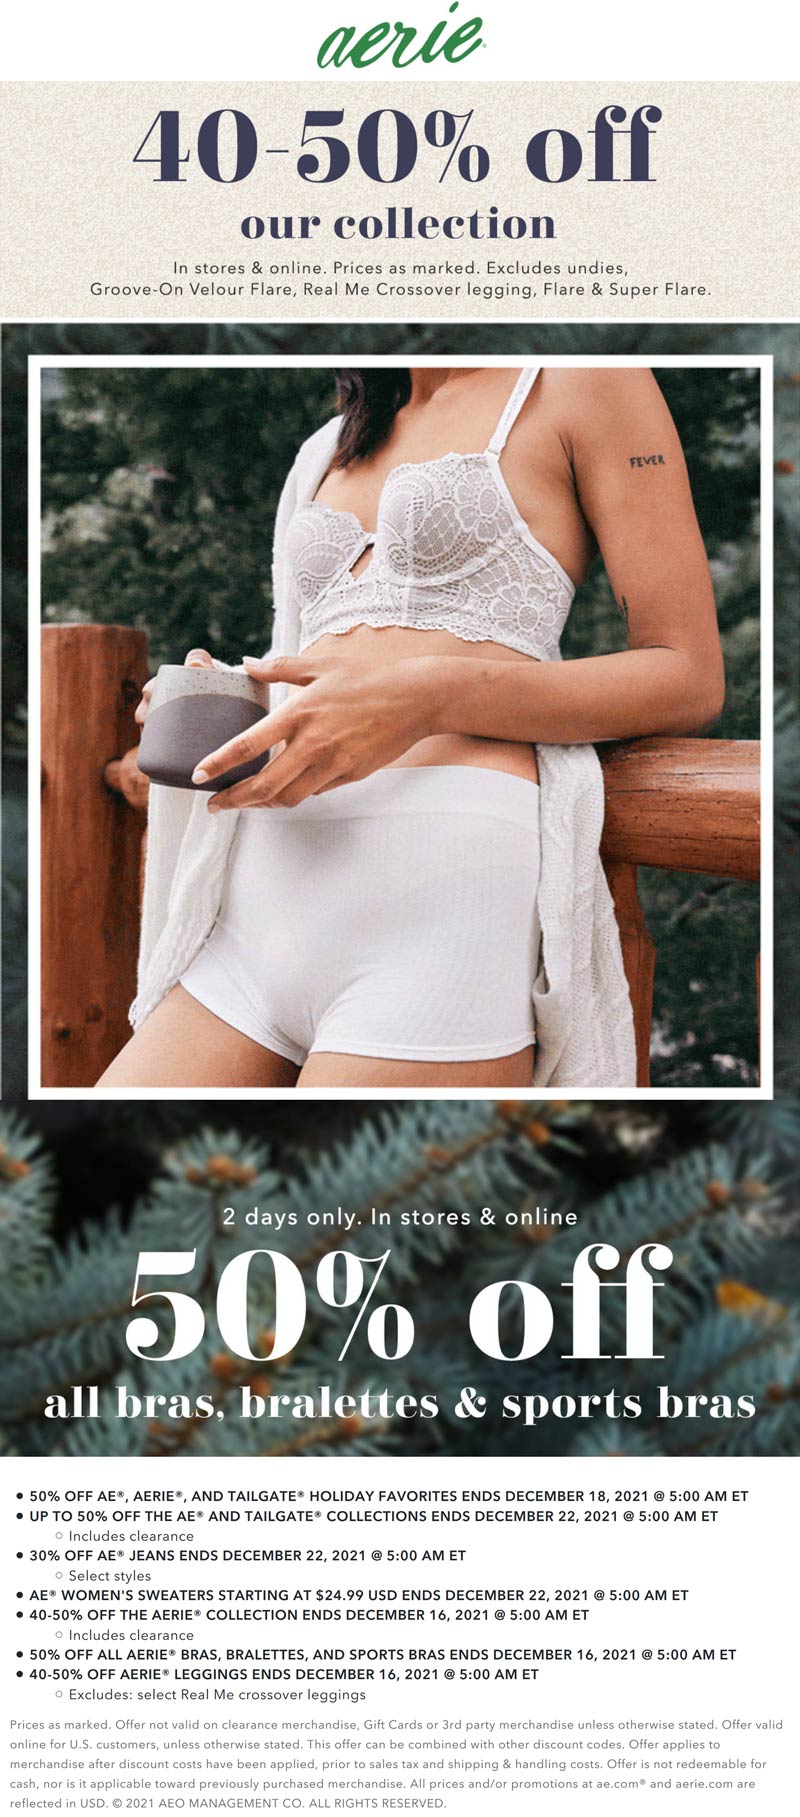 Aerie stores Coupon  40-50% off the collection at Aerie #aerie 